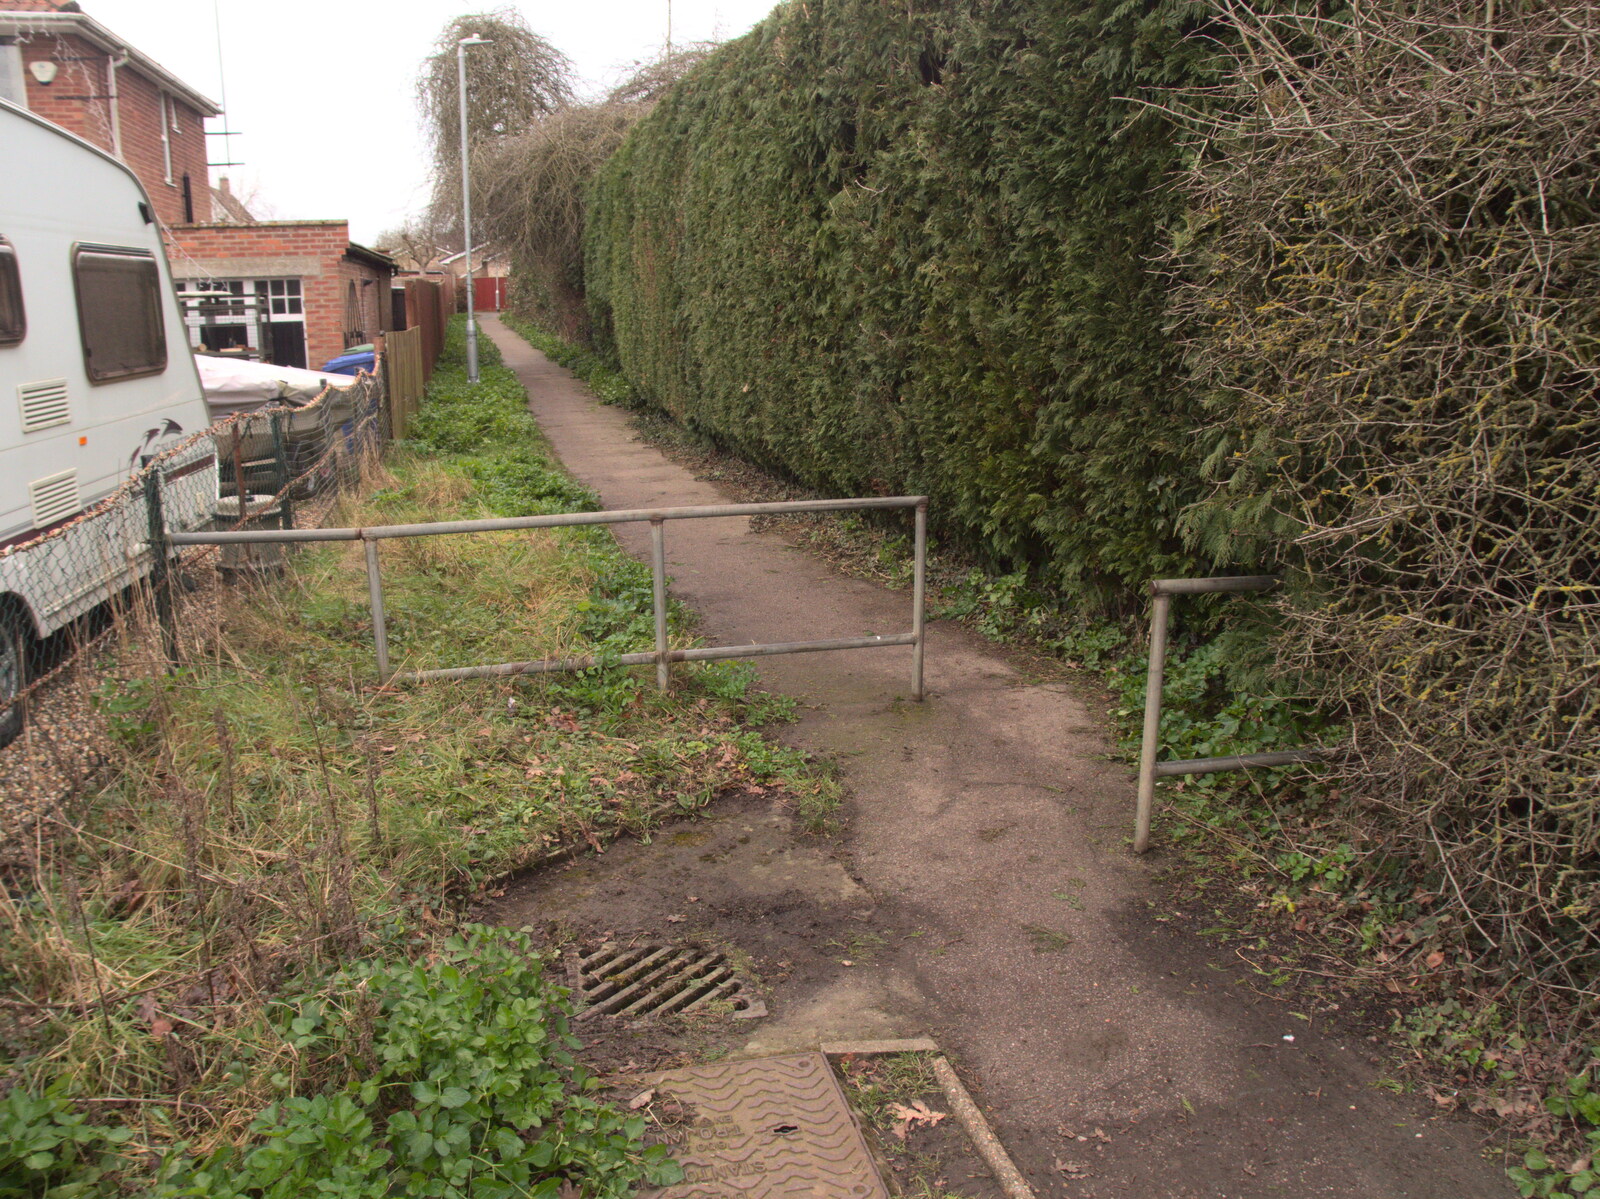 The path opposite Belland's Way from The Old Sewage Works, The Avenue, Brome, Suffolk - 20th February 2021